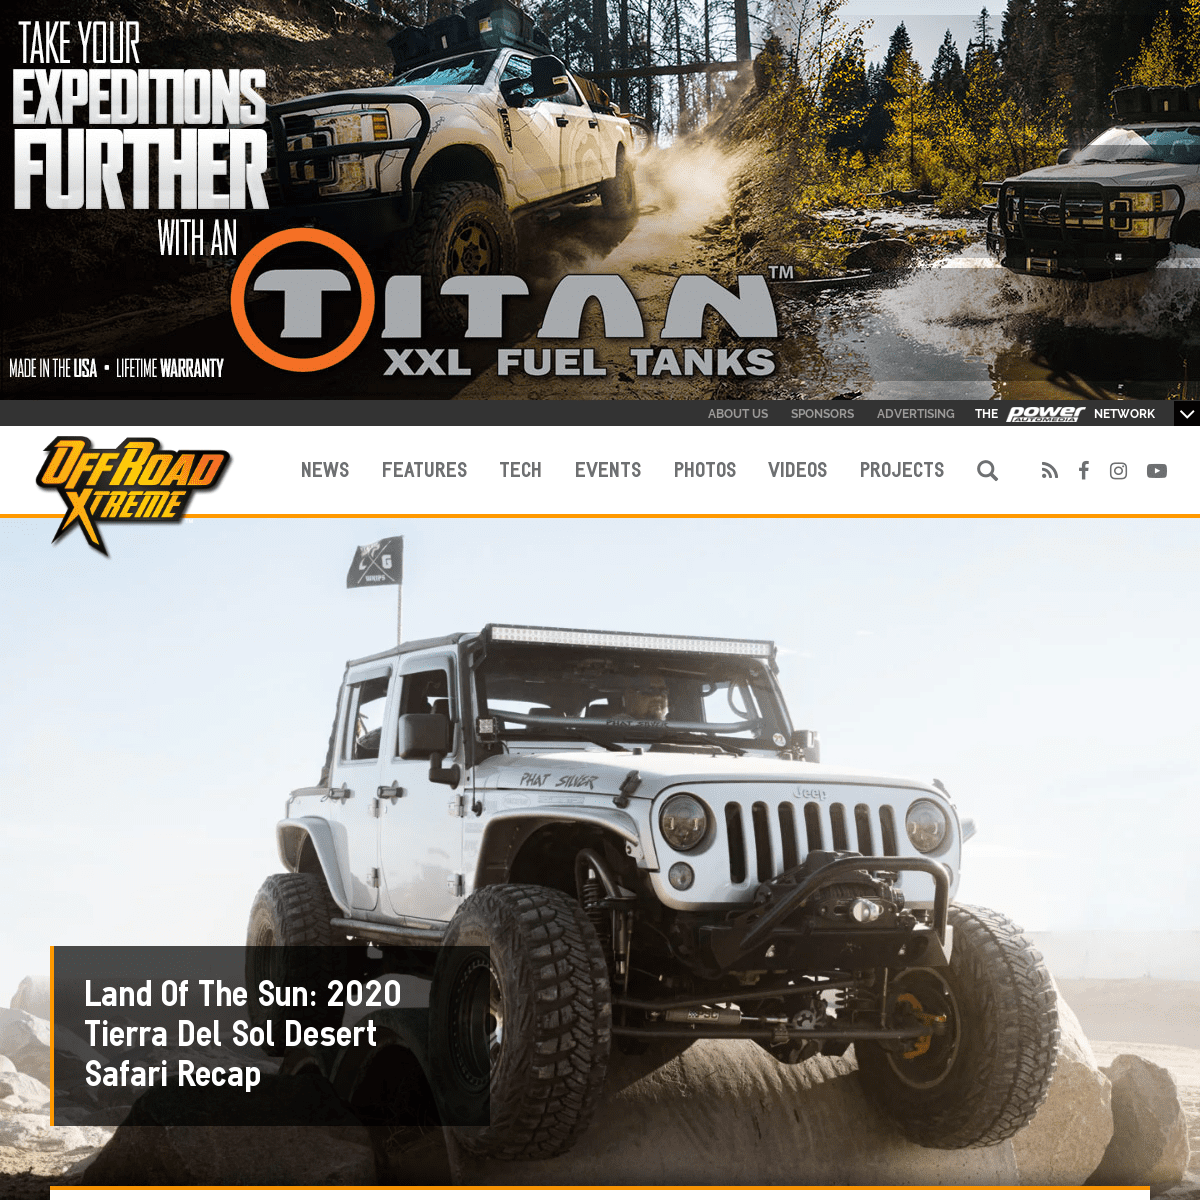 A complete backup of offroadxtreme.com